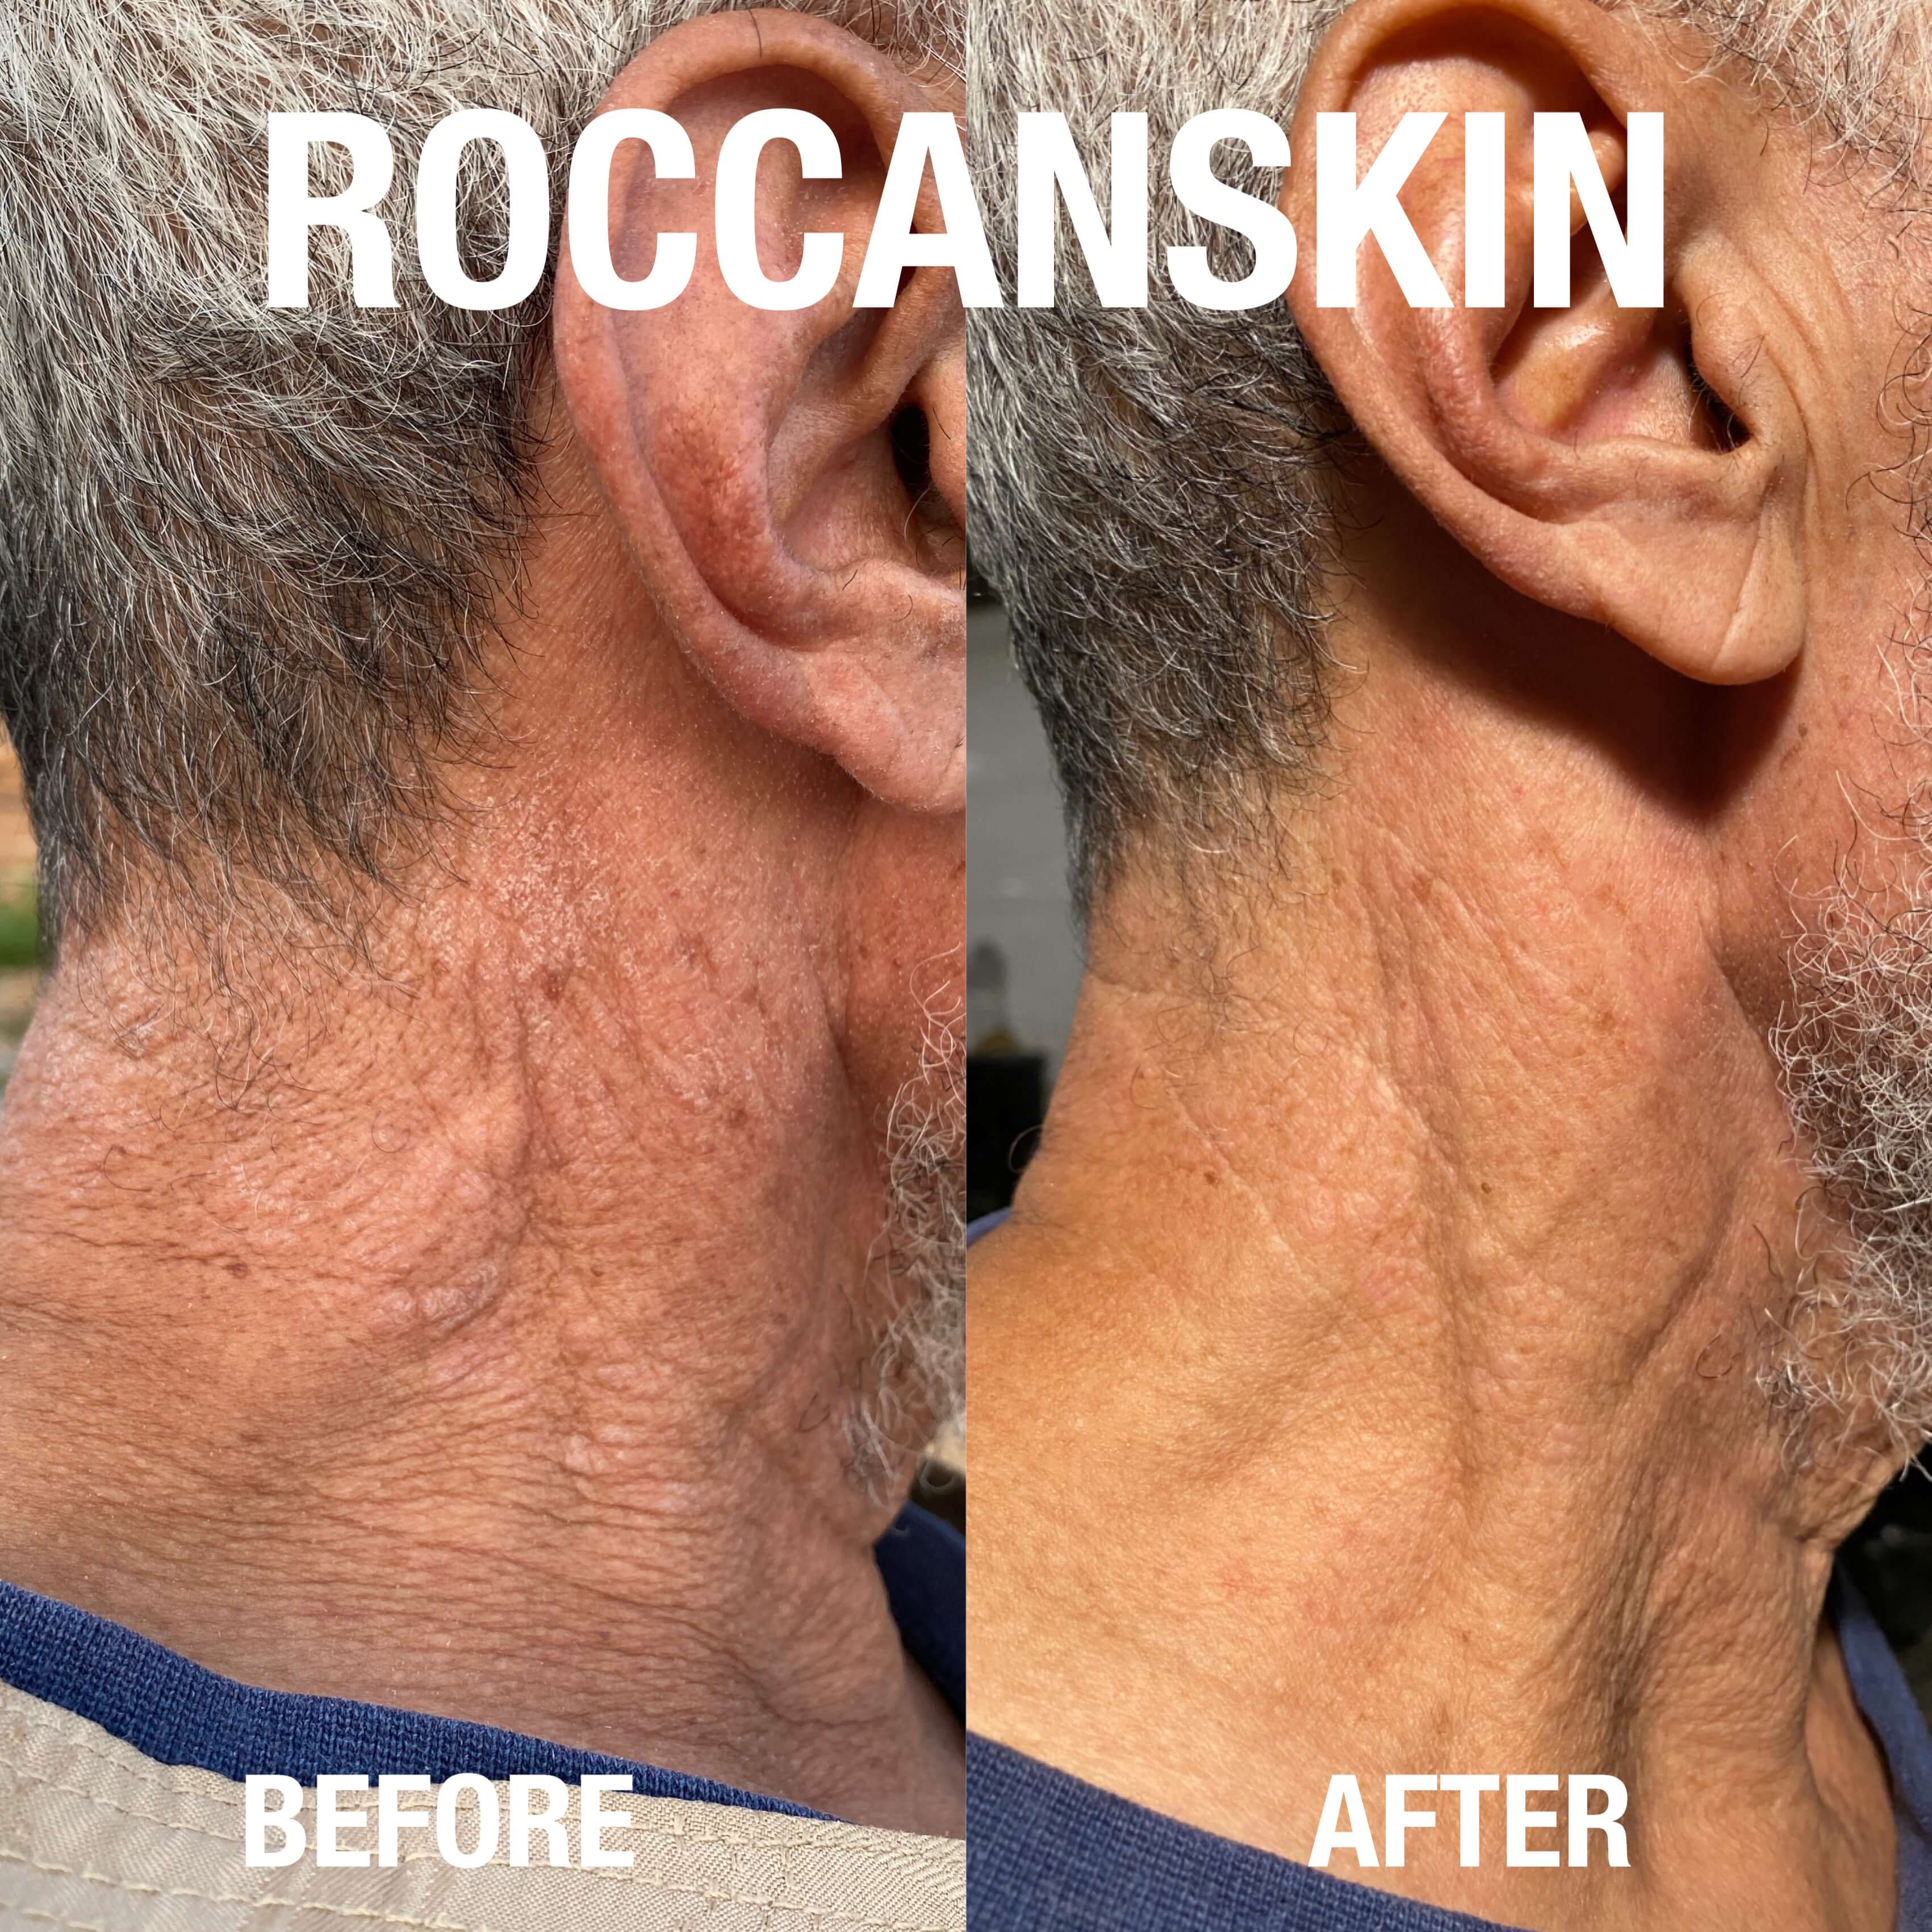 psoriasis before and after exfoliating with roccanskin exfoliating mitt.